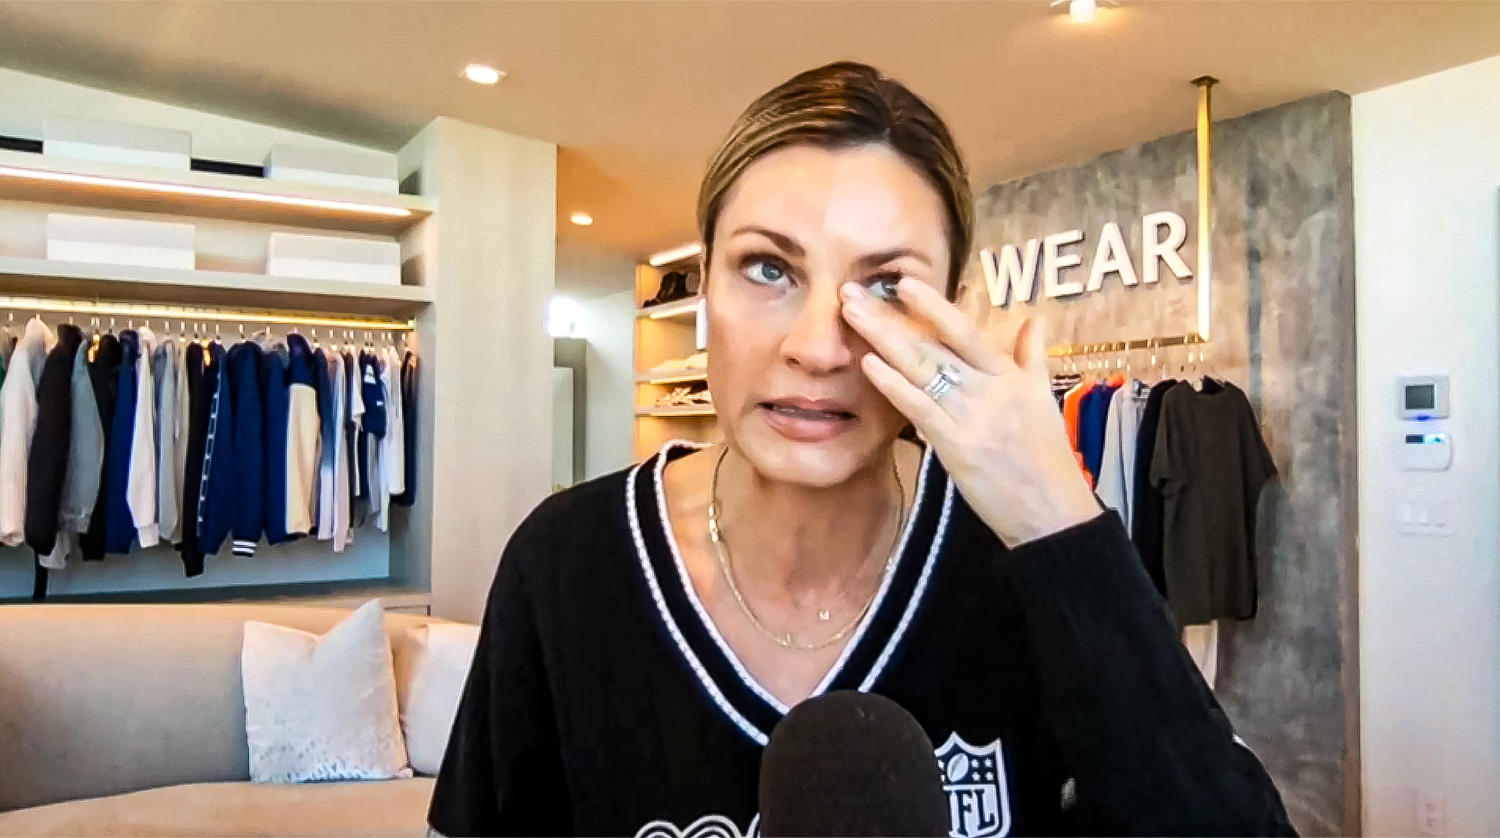 Exclusive: Erin Andrews gets emotional remembering when she called her
parents about stalker's video